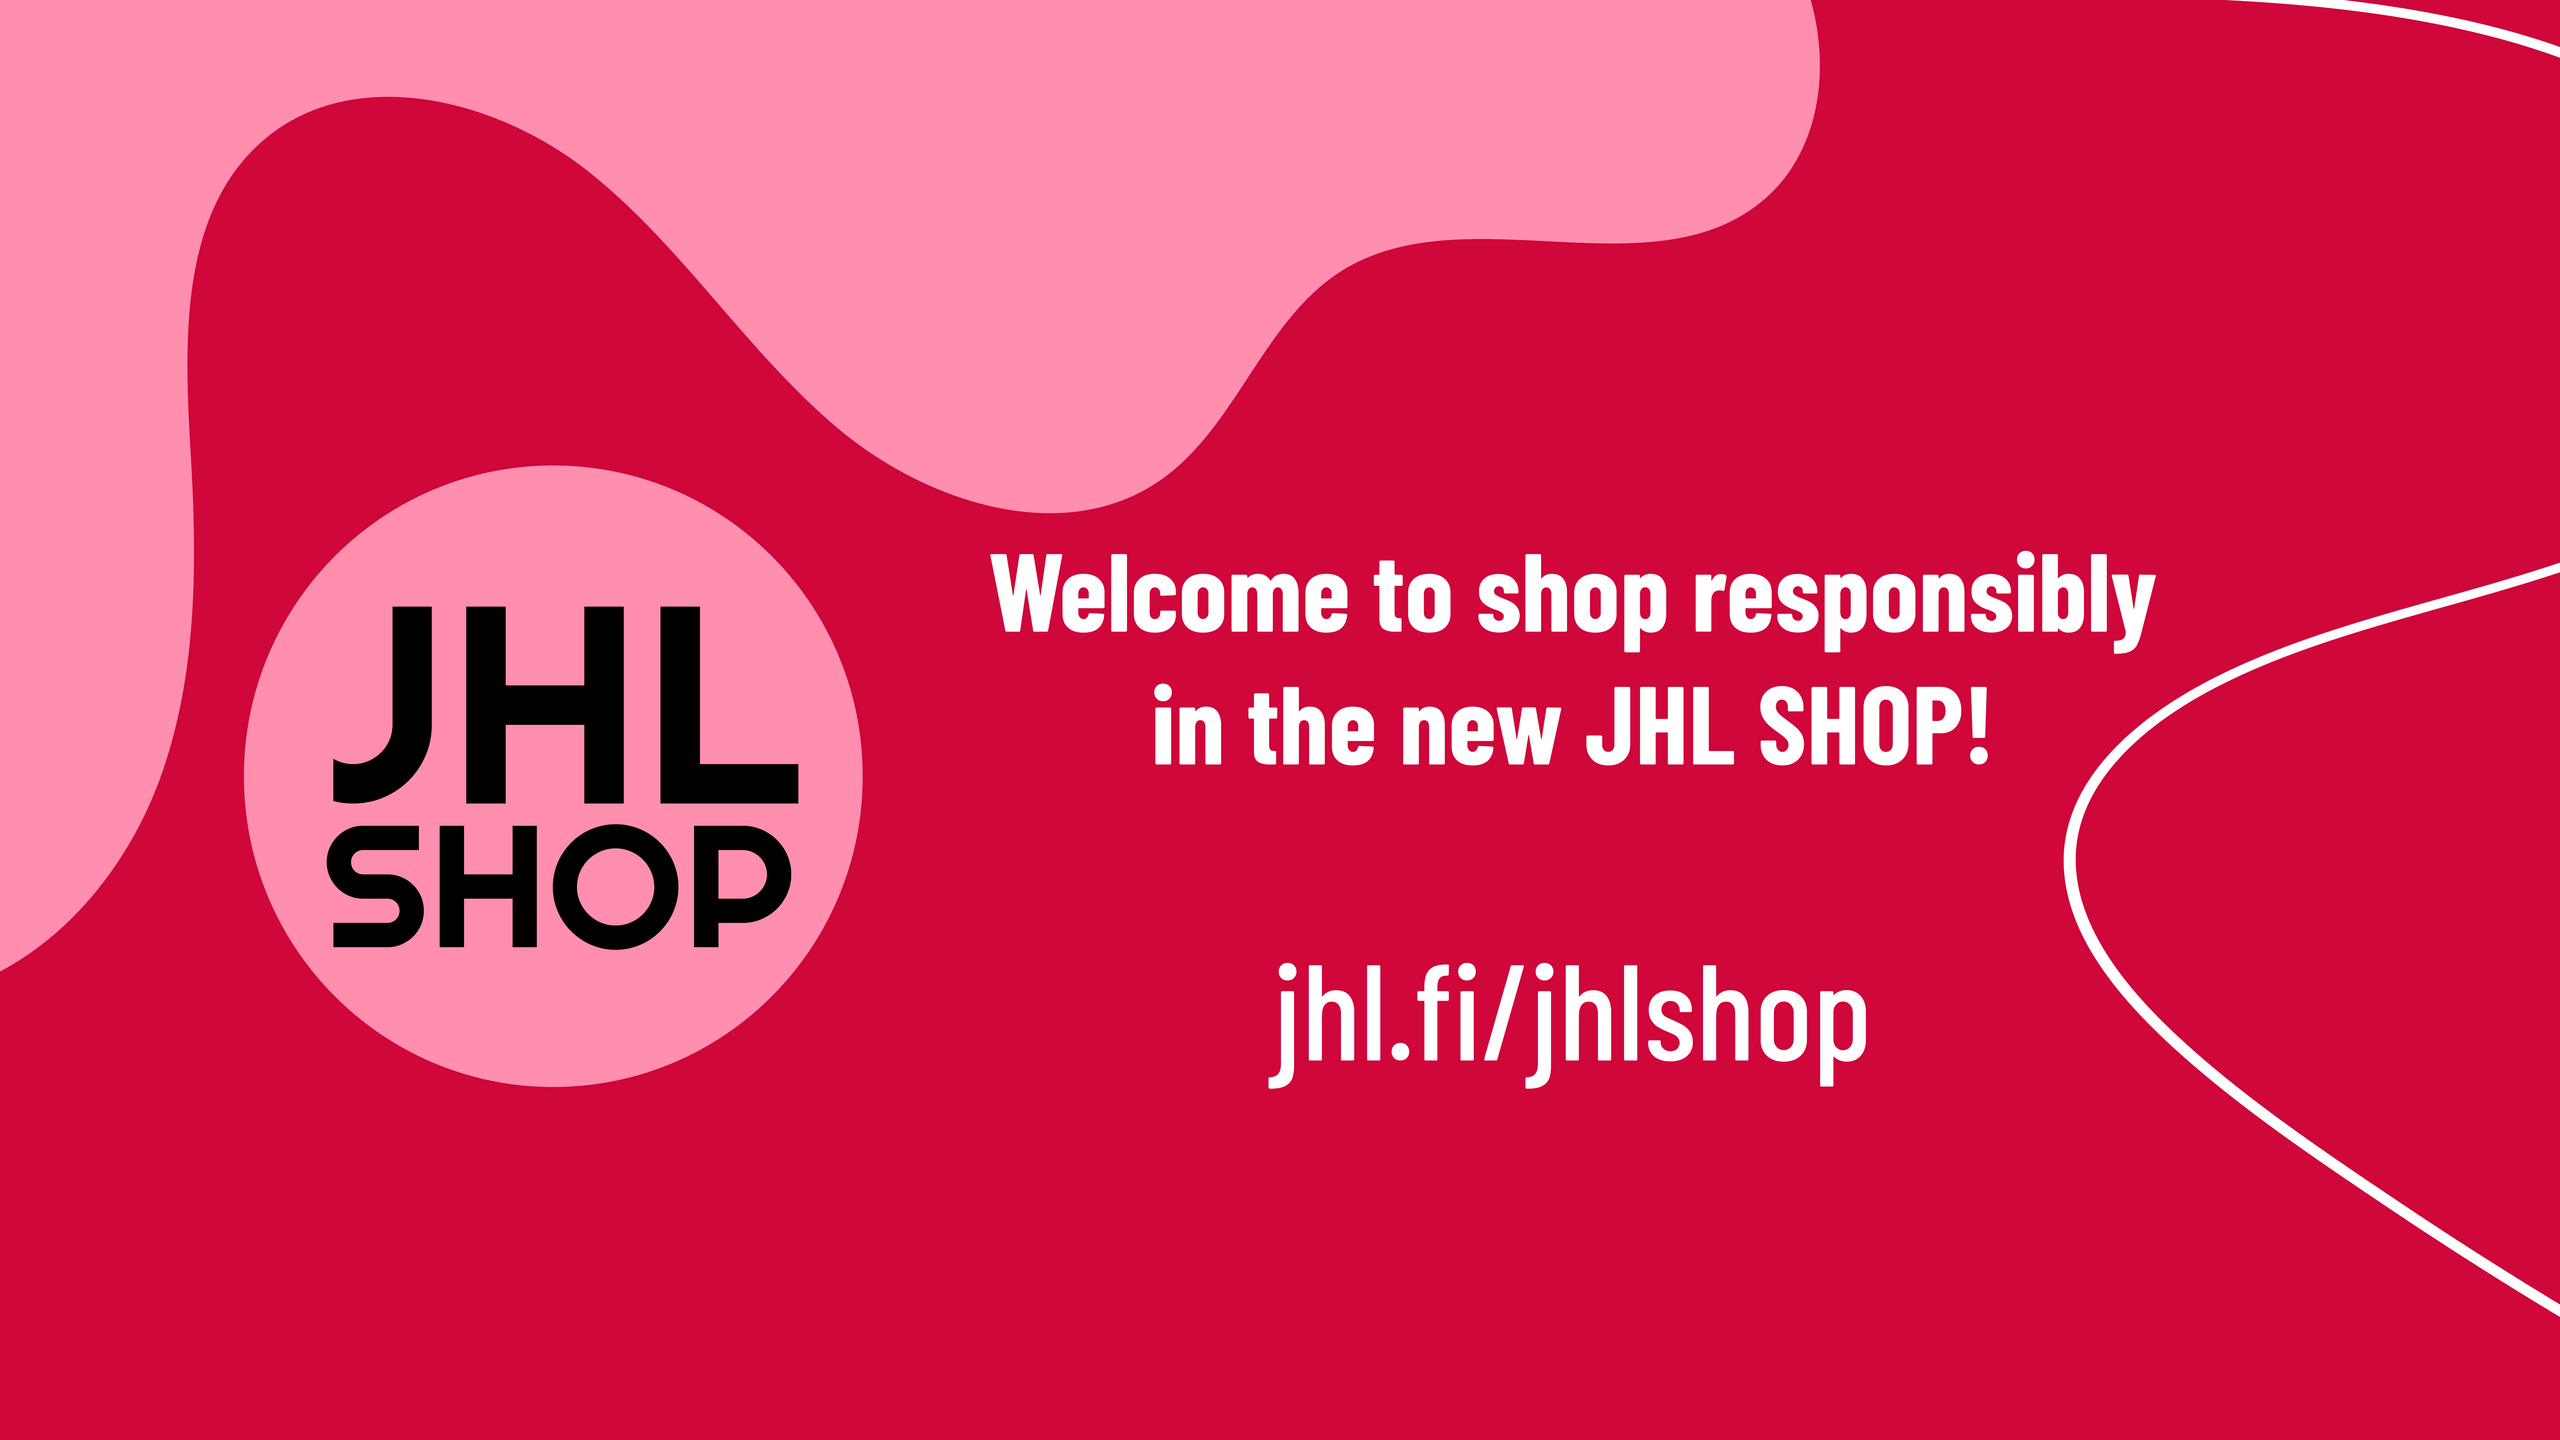 Text “JHL Shop” and “Welcome to shop responsibly in the new JHL Shop” on red and pink background.